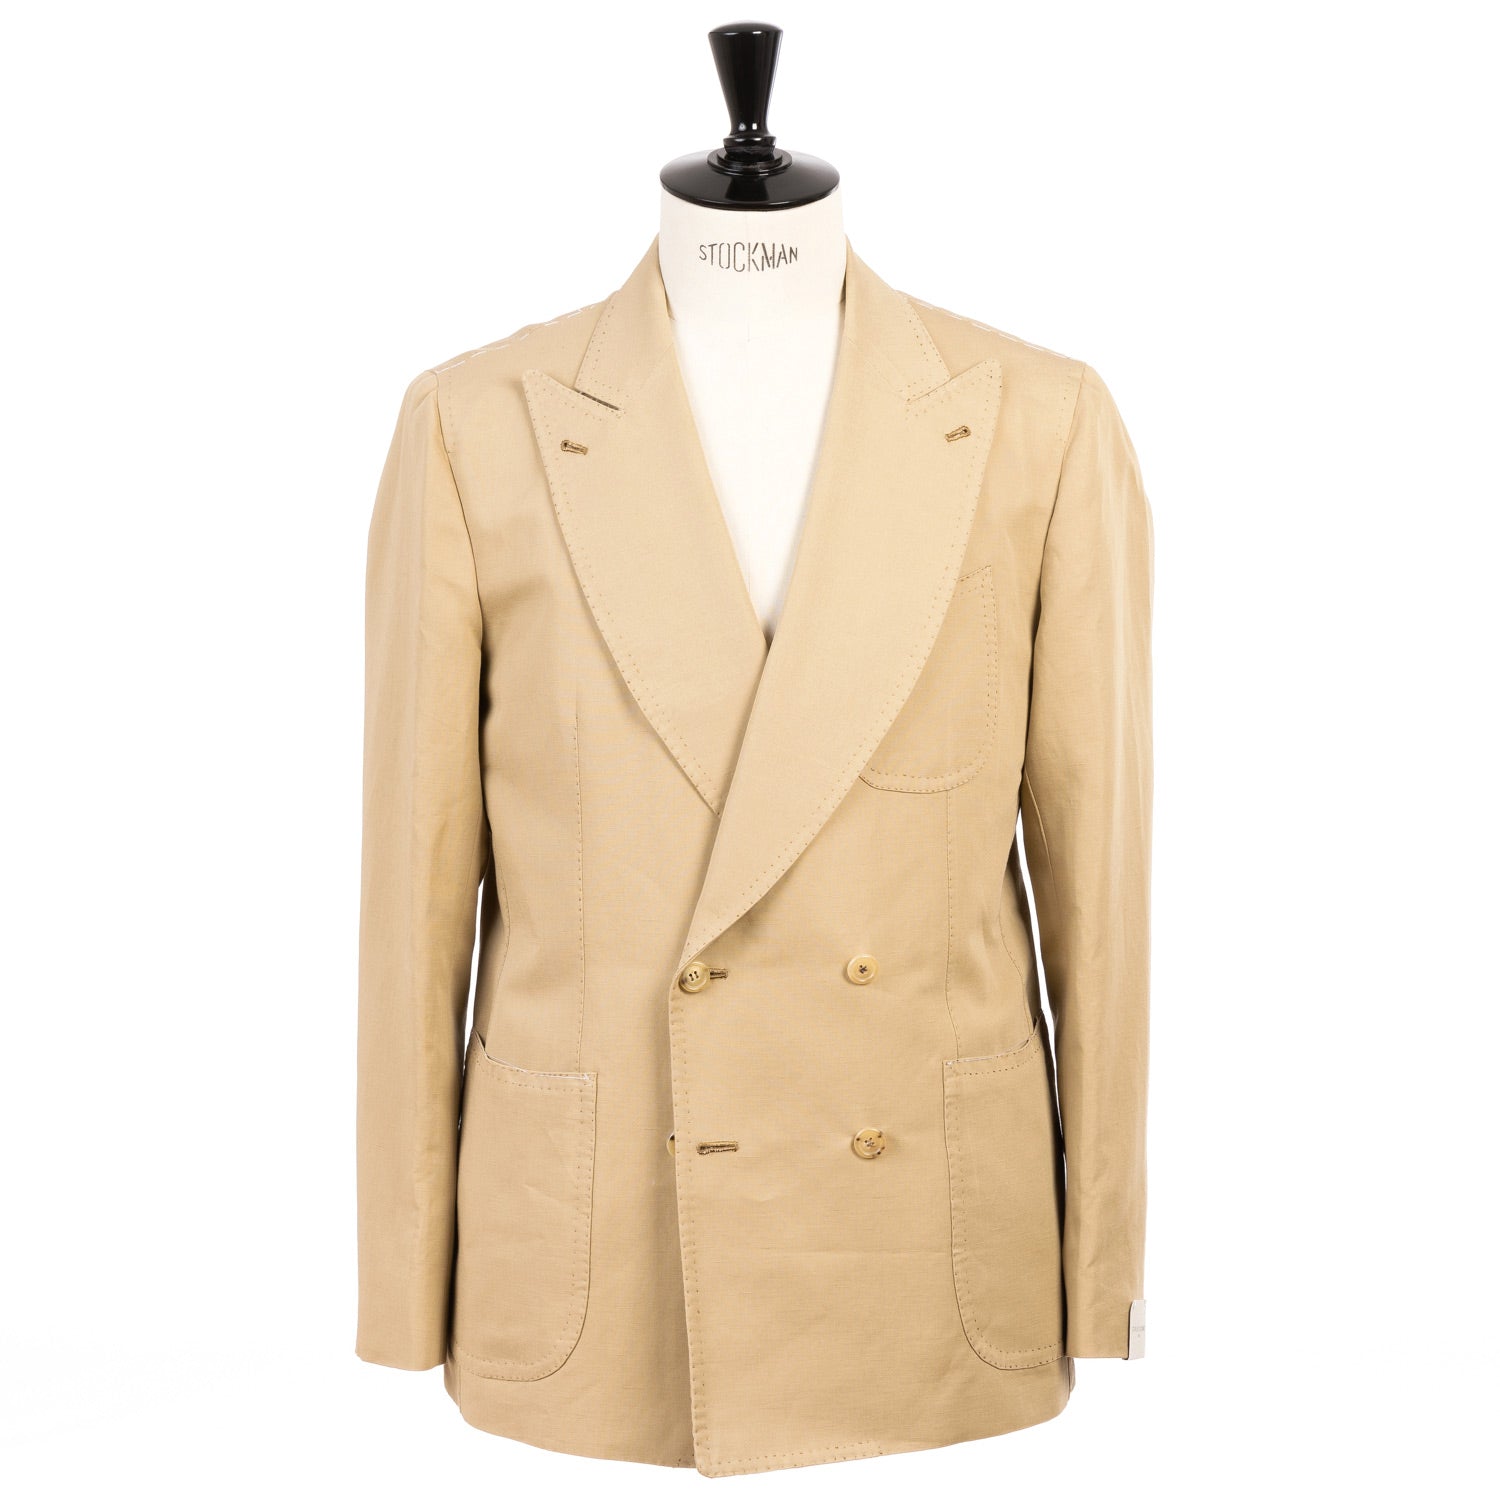 foufou linen double breasted jacket